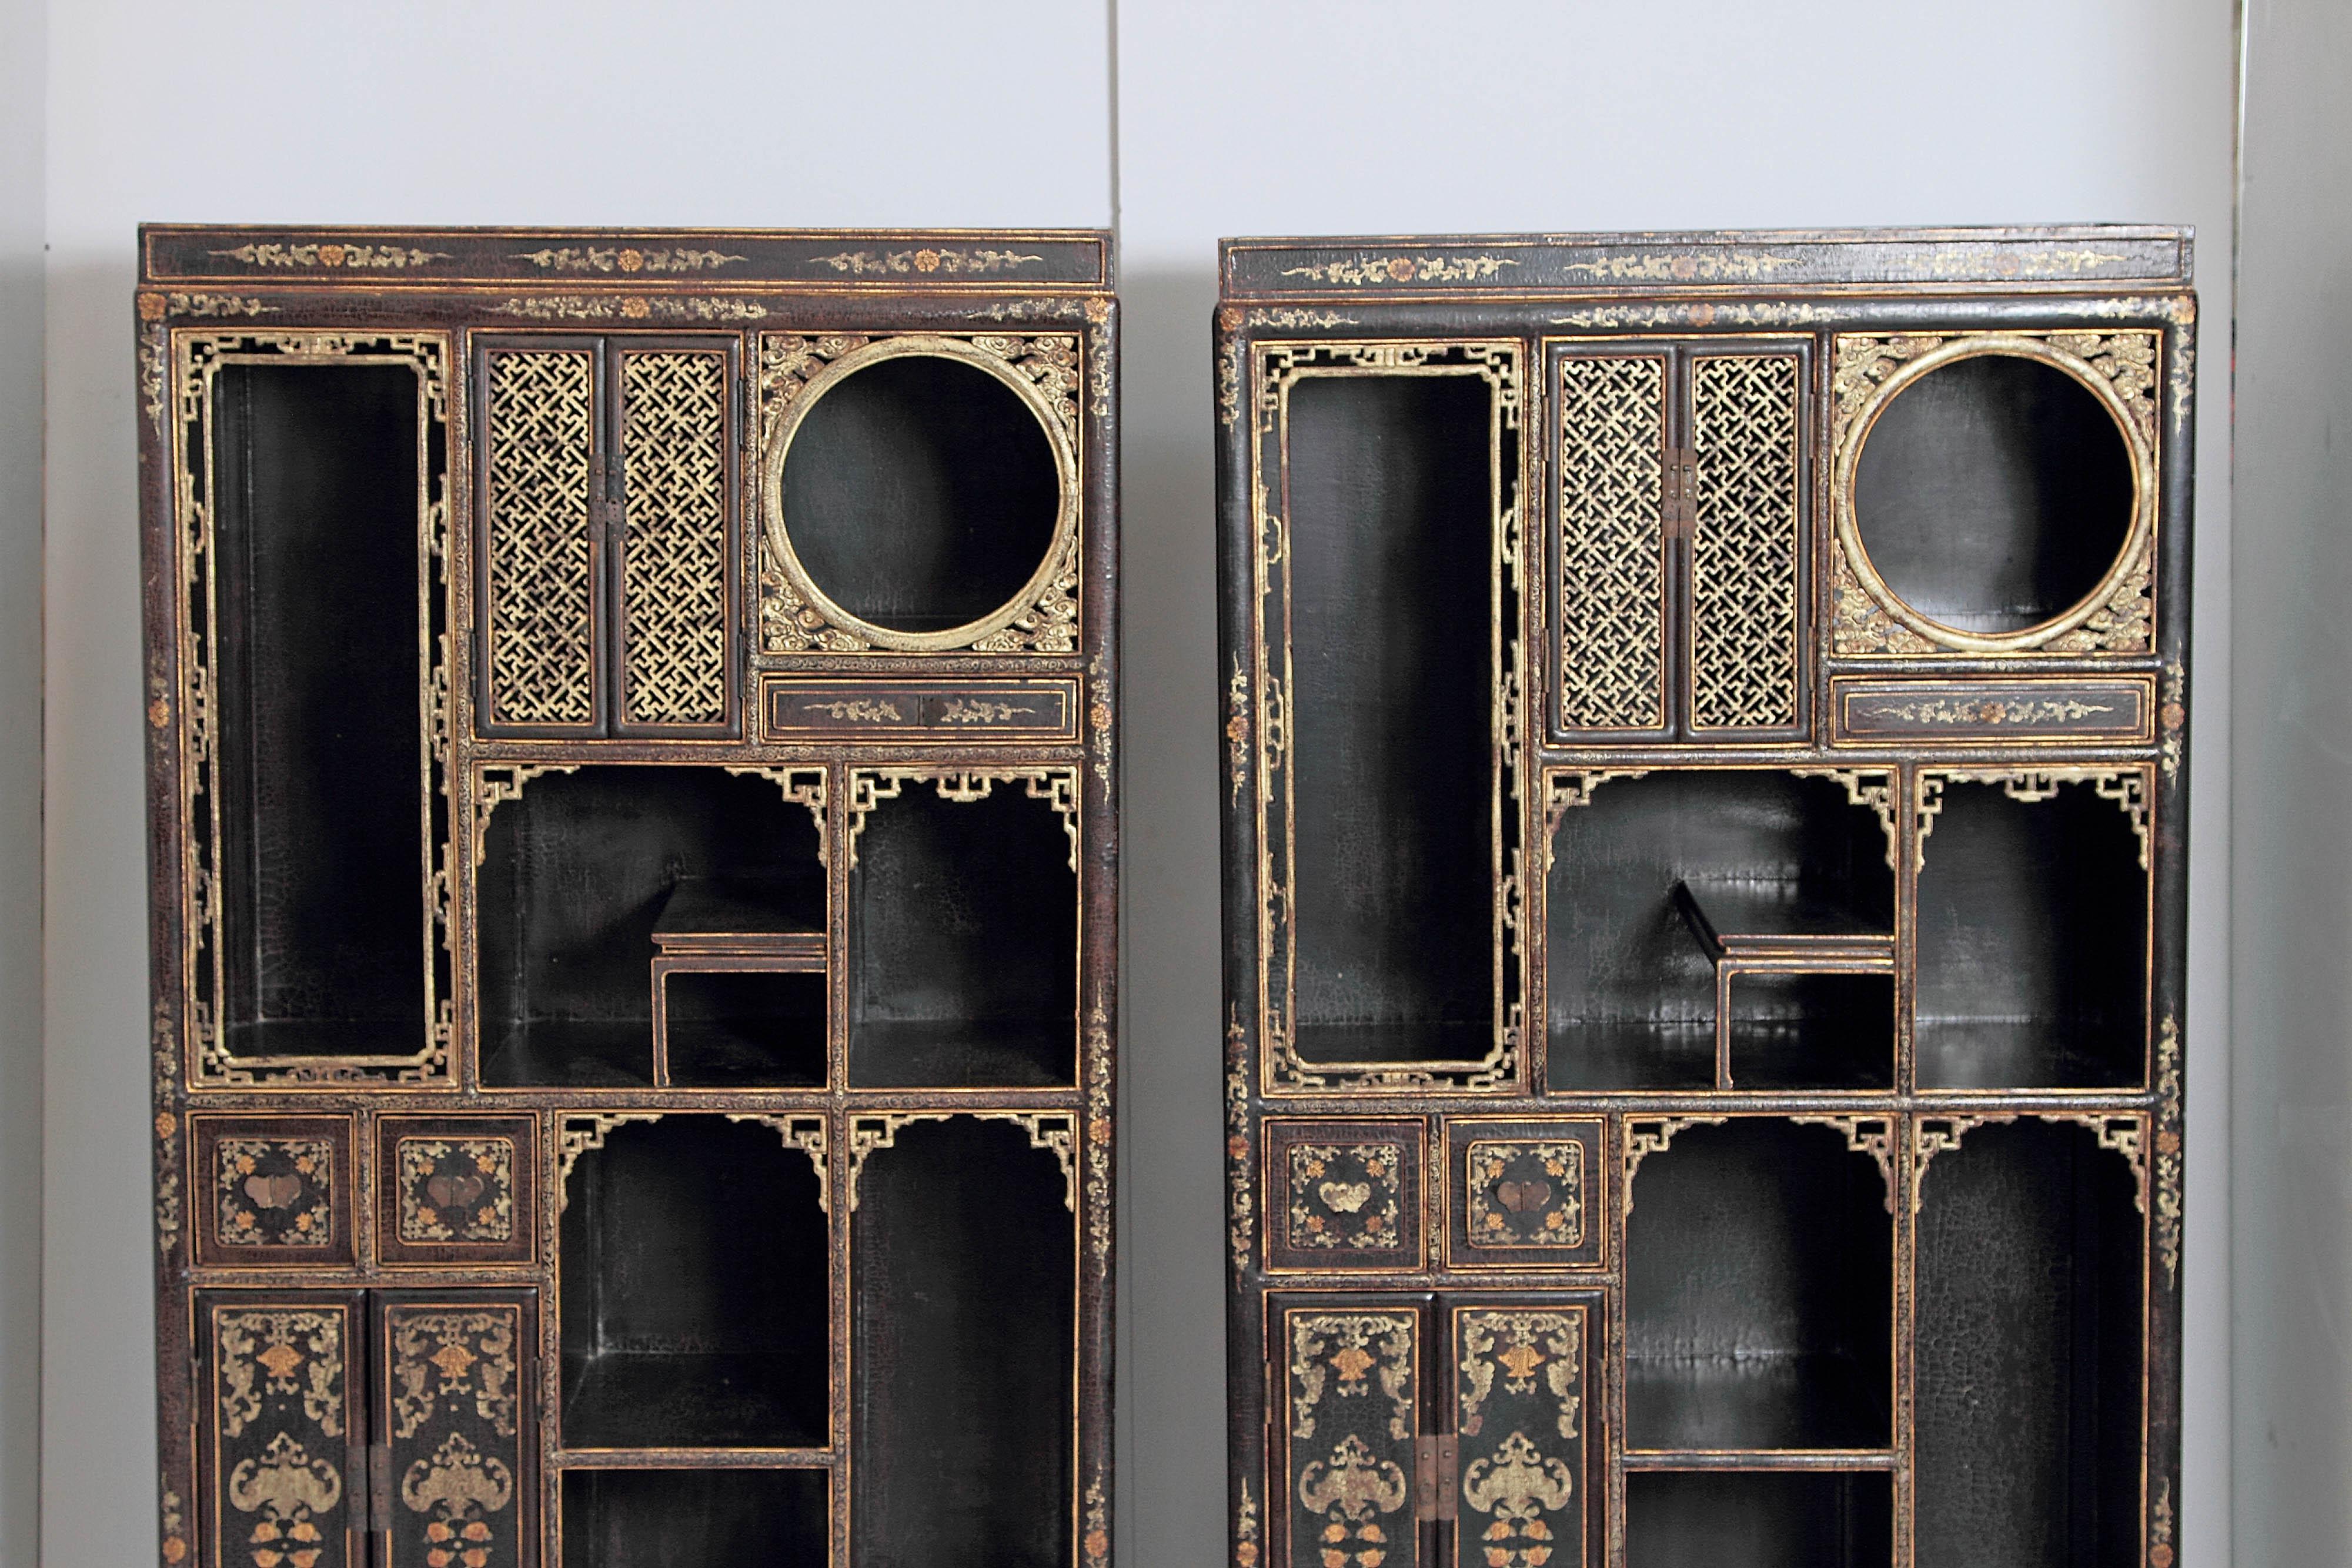 A pair of Chinese black lacquer and gilt display cabinets. A variety of open shelves and closed cubbyholes with doors and drawers. China, mid-20th century, probably 1950s